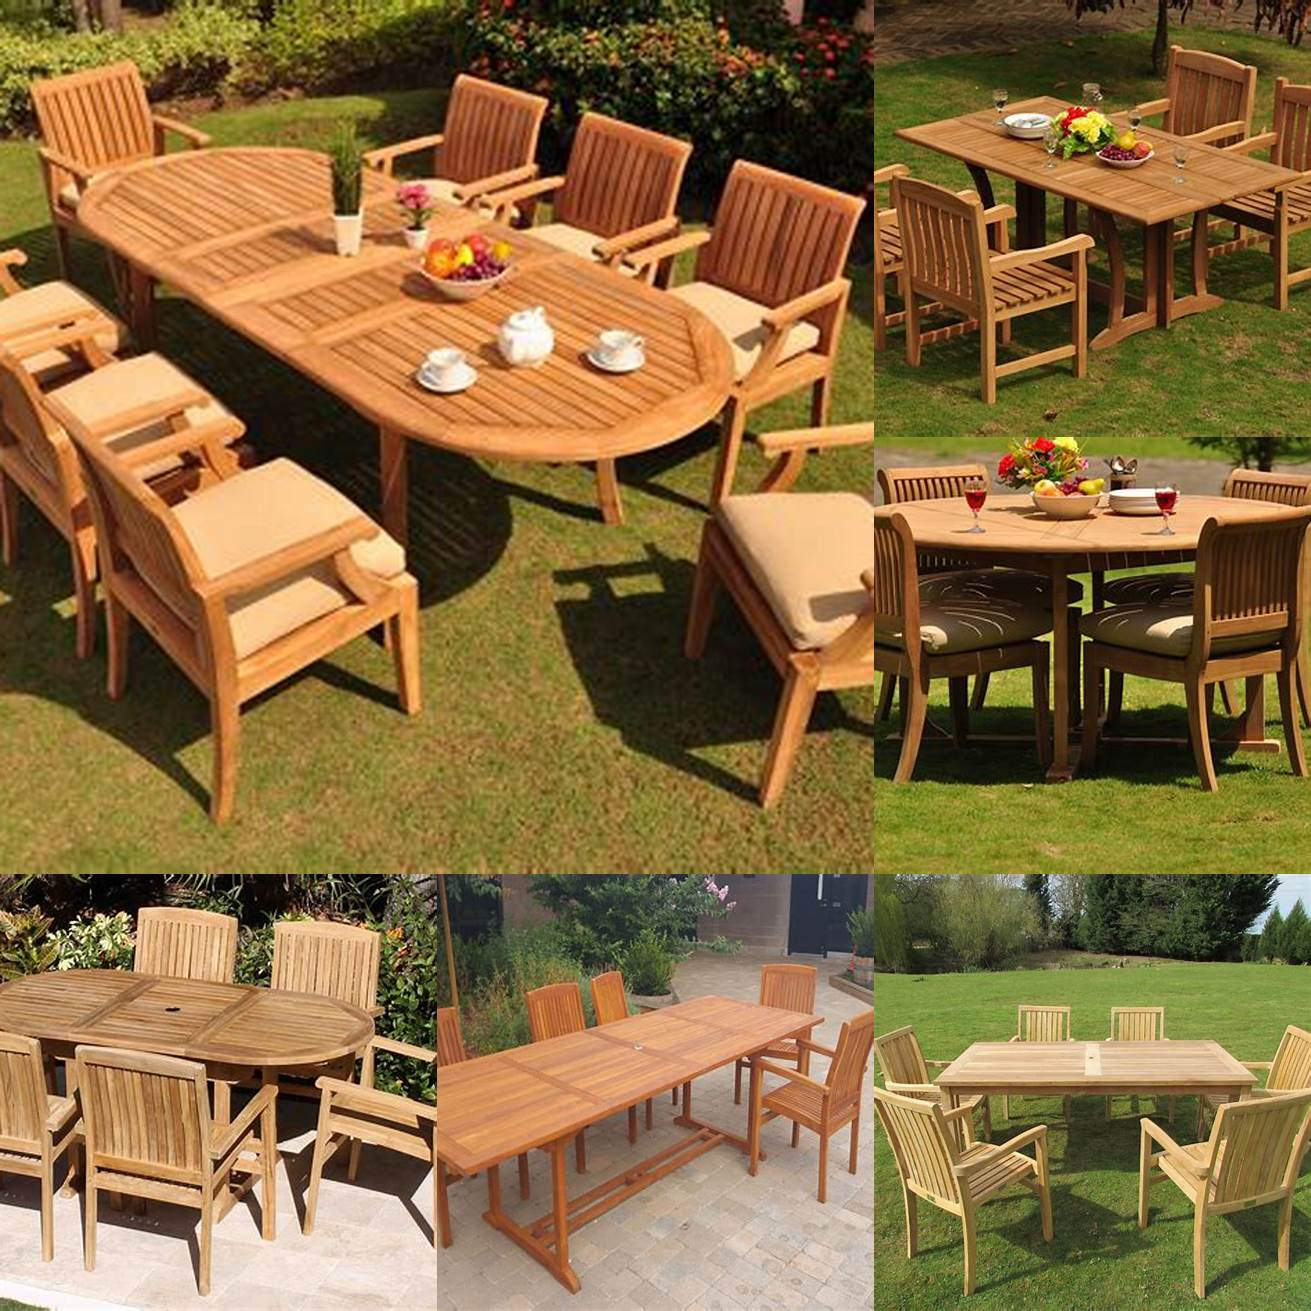 Teak Chairs and Tables